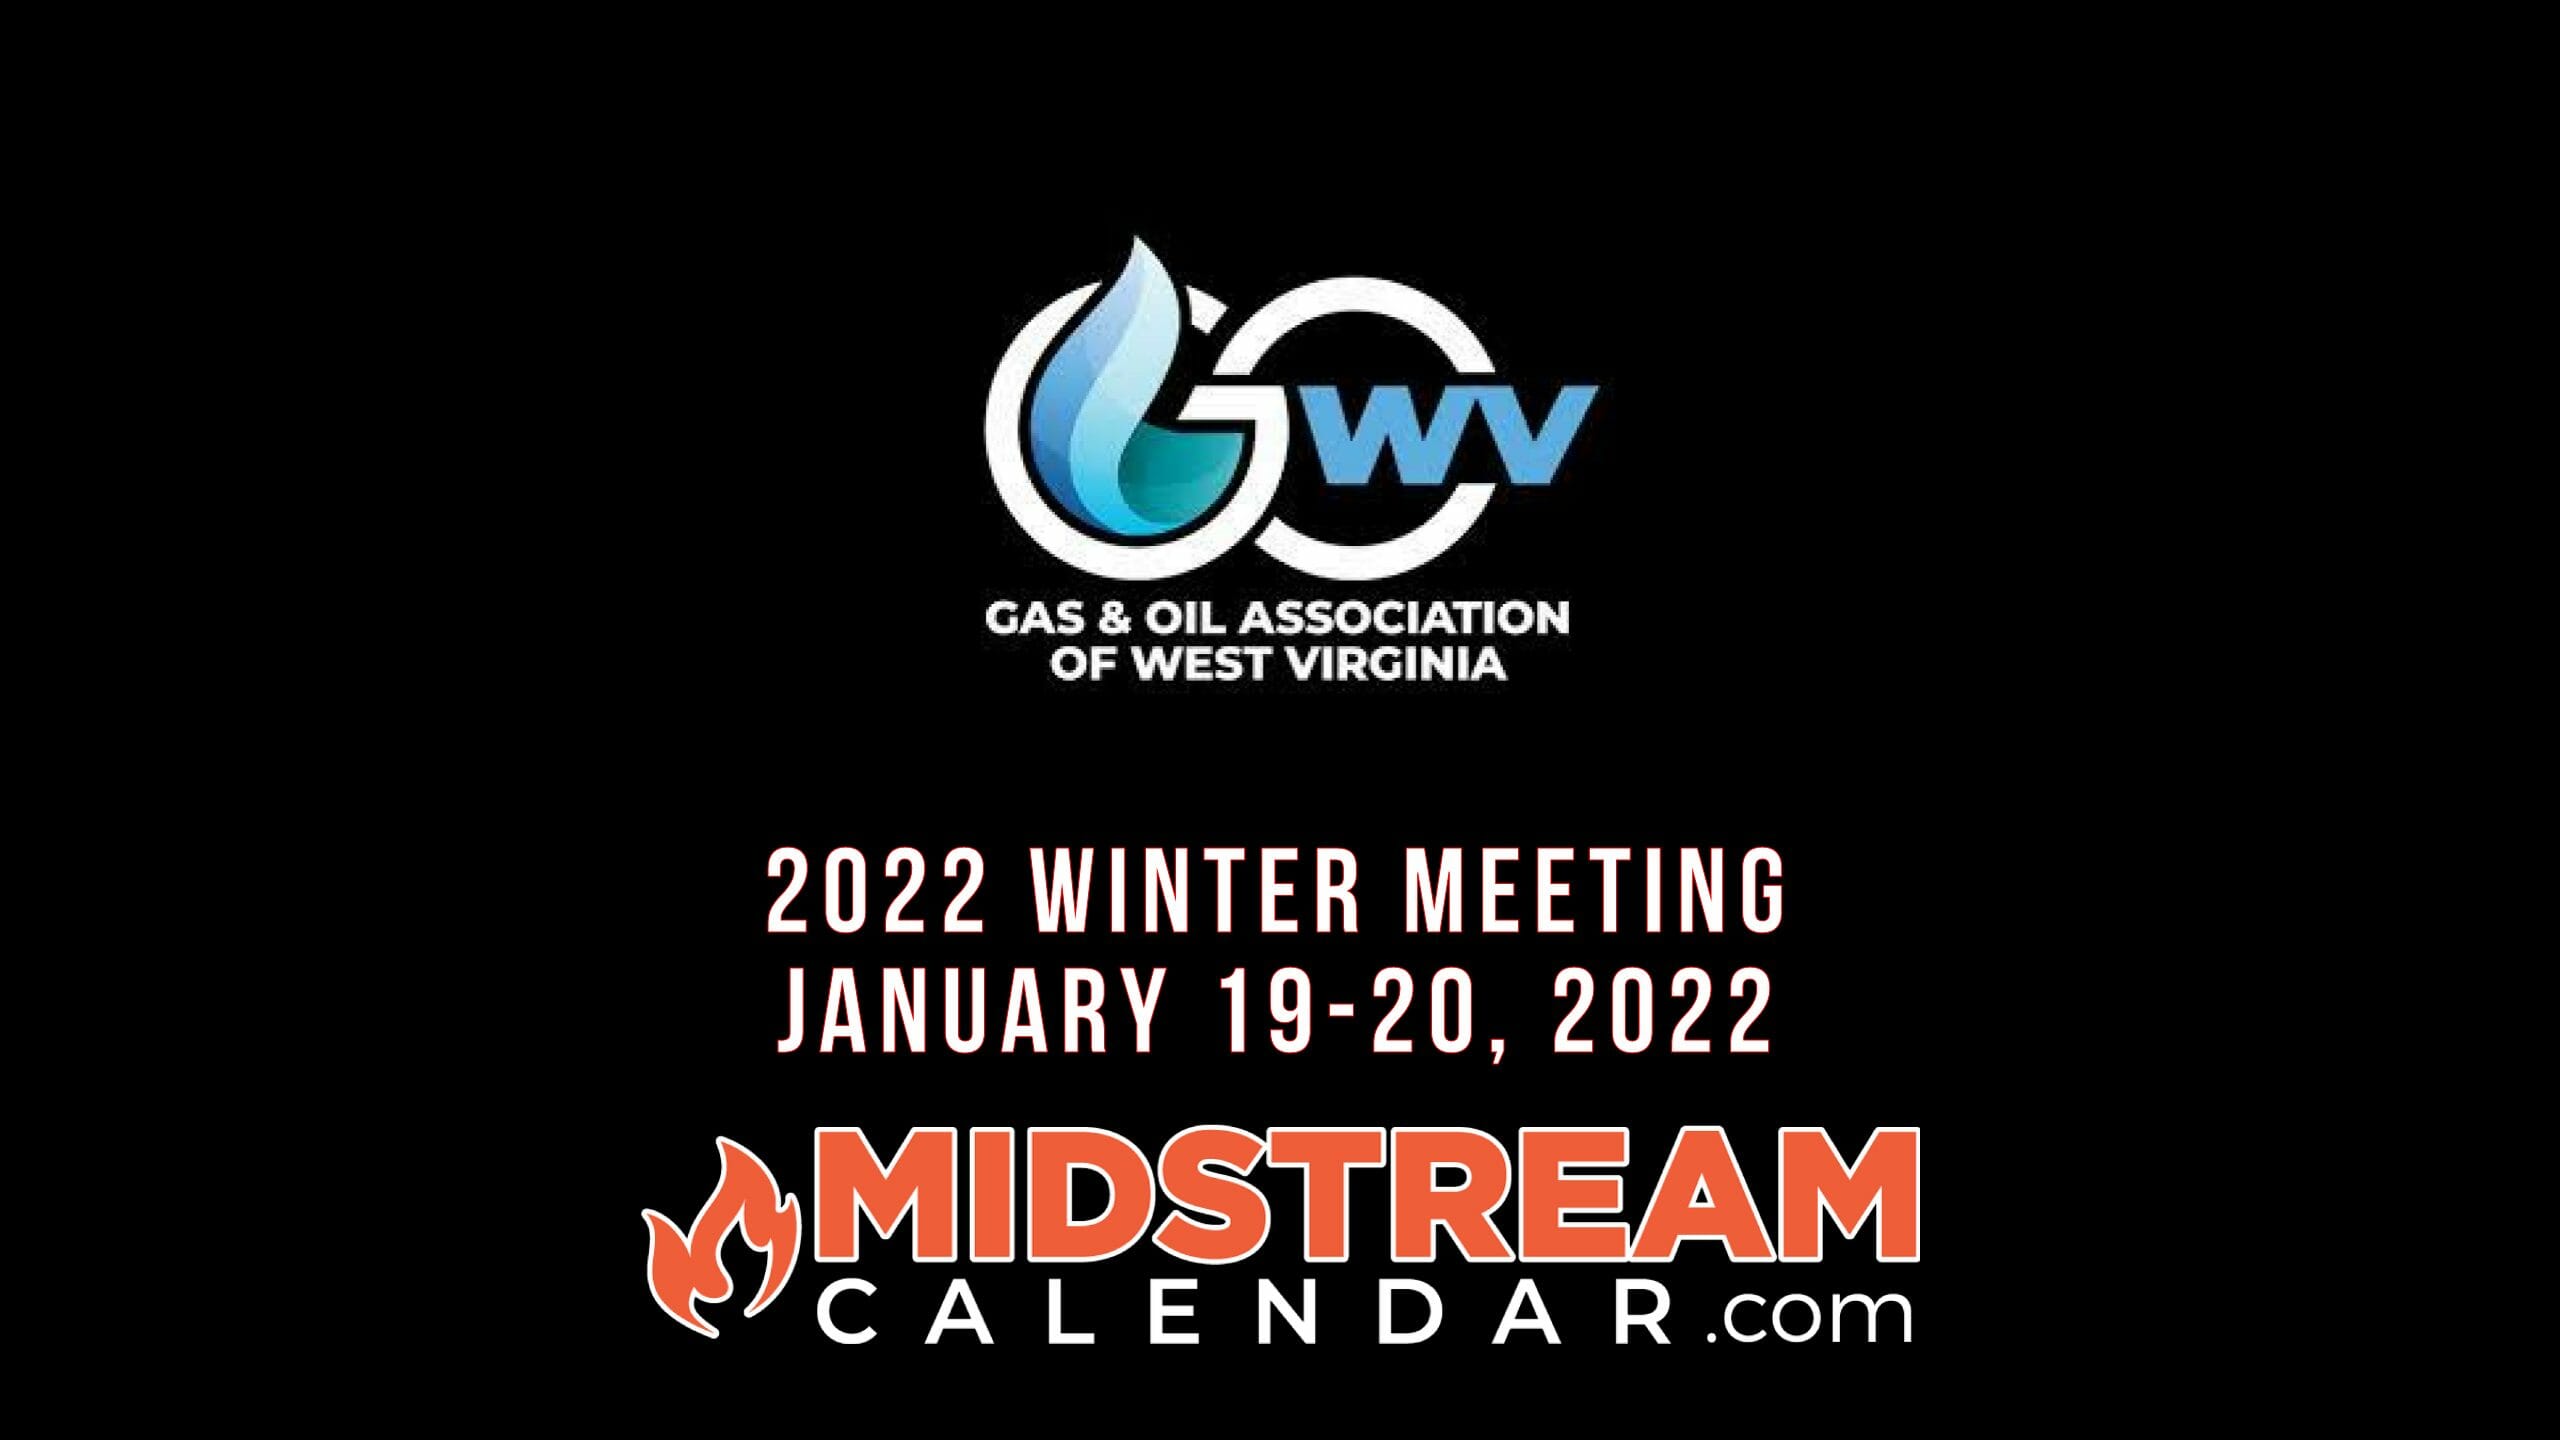 West Virginian Midstream Calendar of Events for Oil and Gas